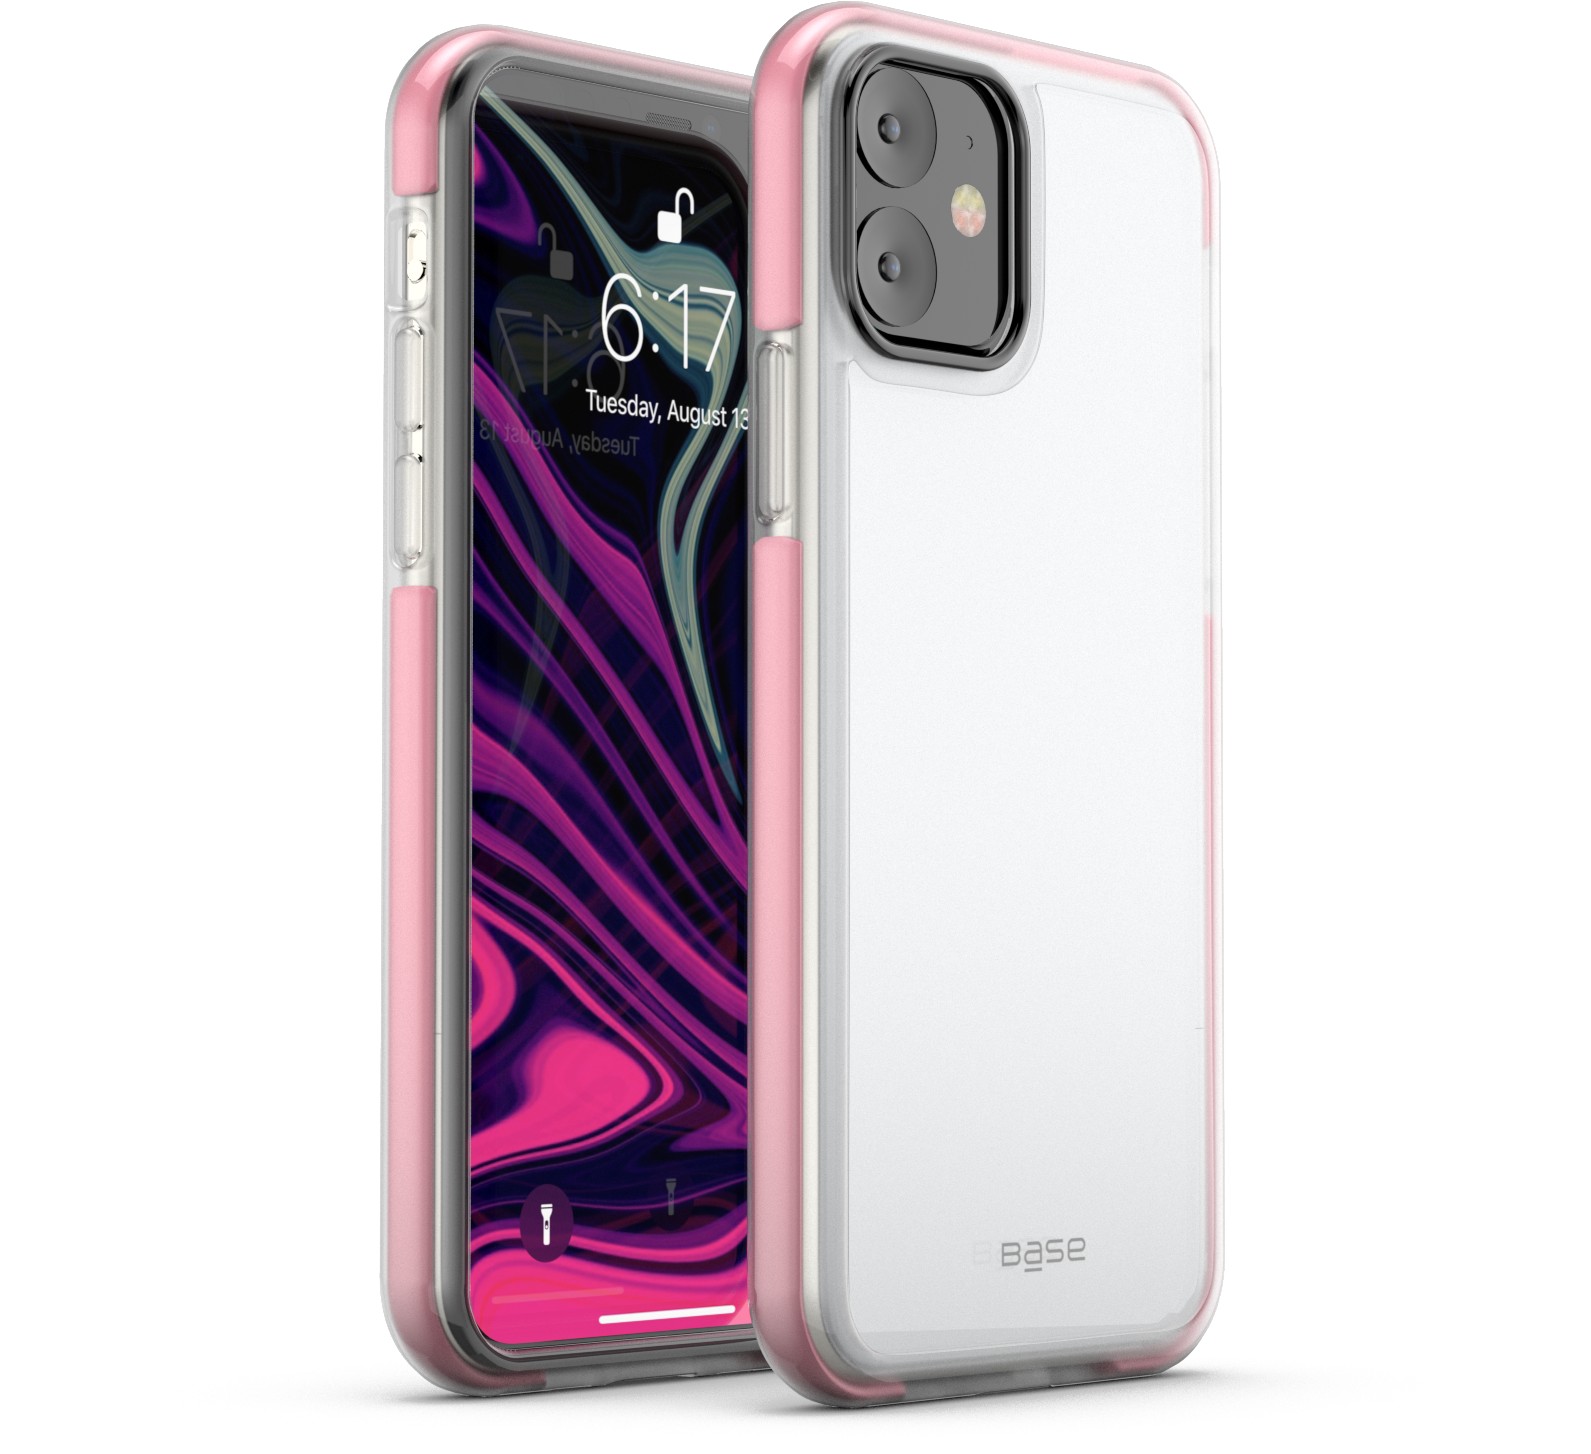 Clear case protector with pink edges For iPhone 11 cell phones